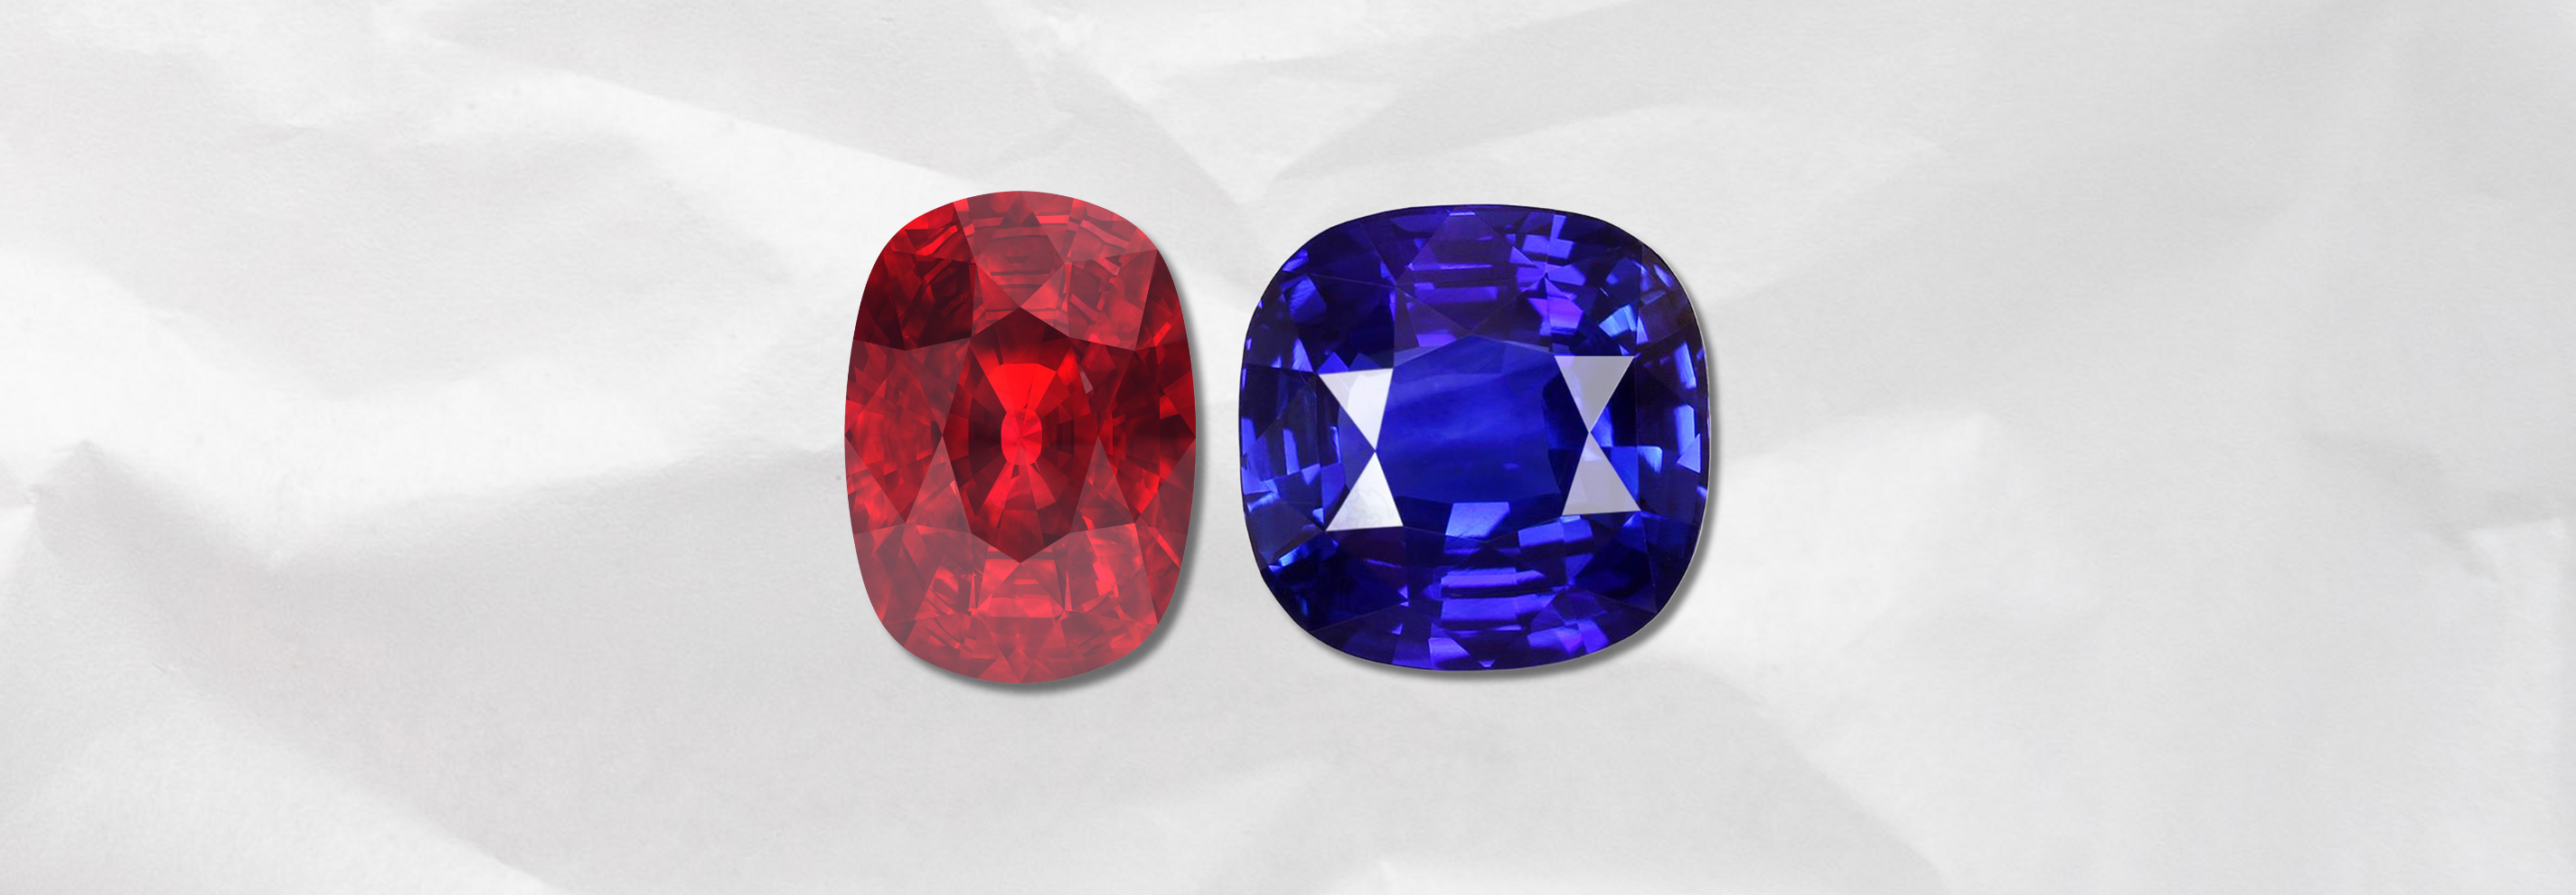 Corundum and their family Ruby and Sapphire